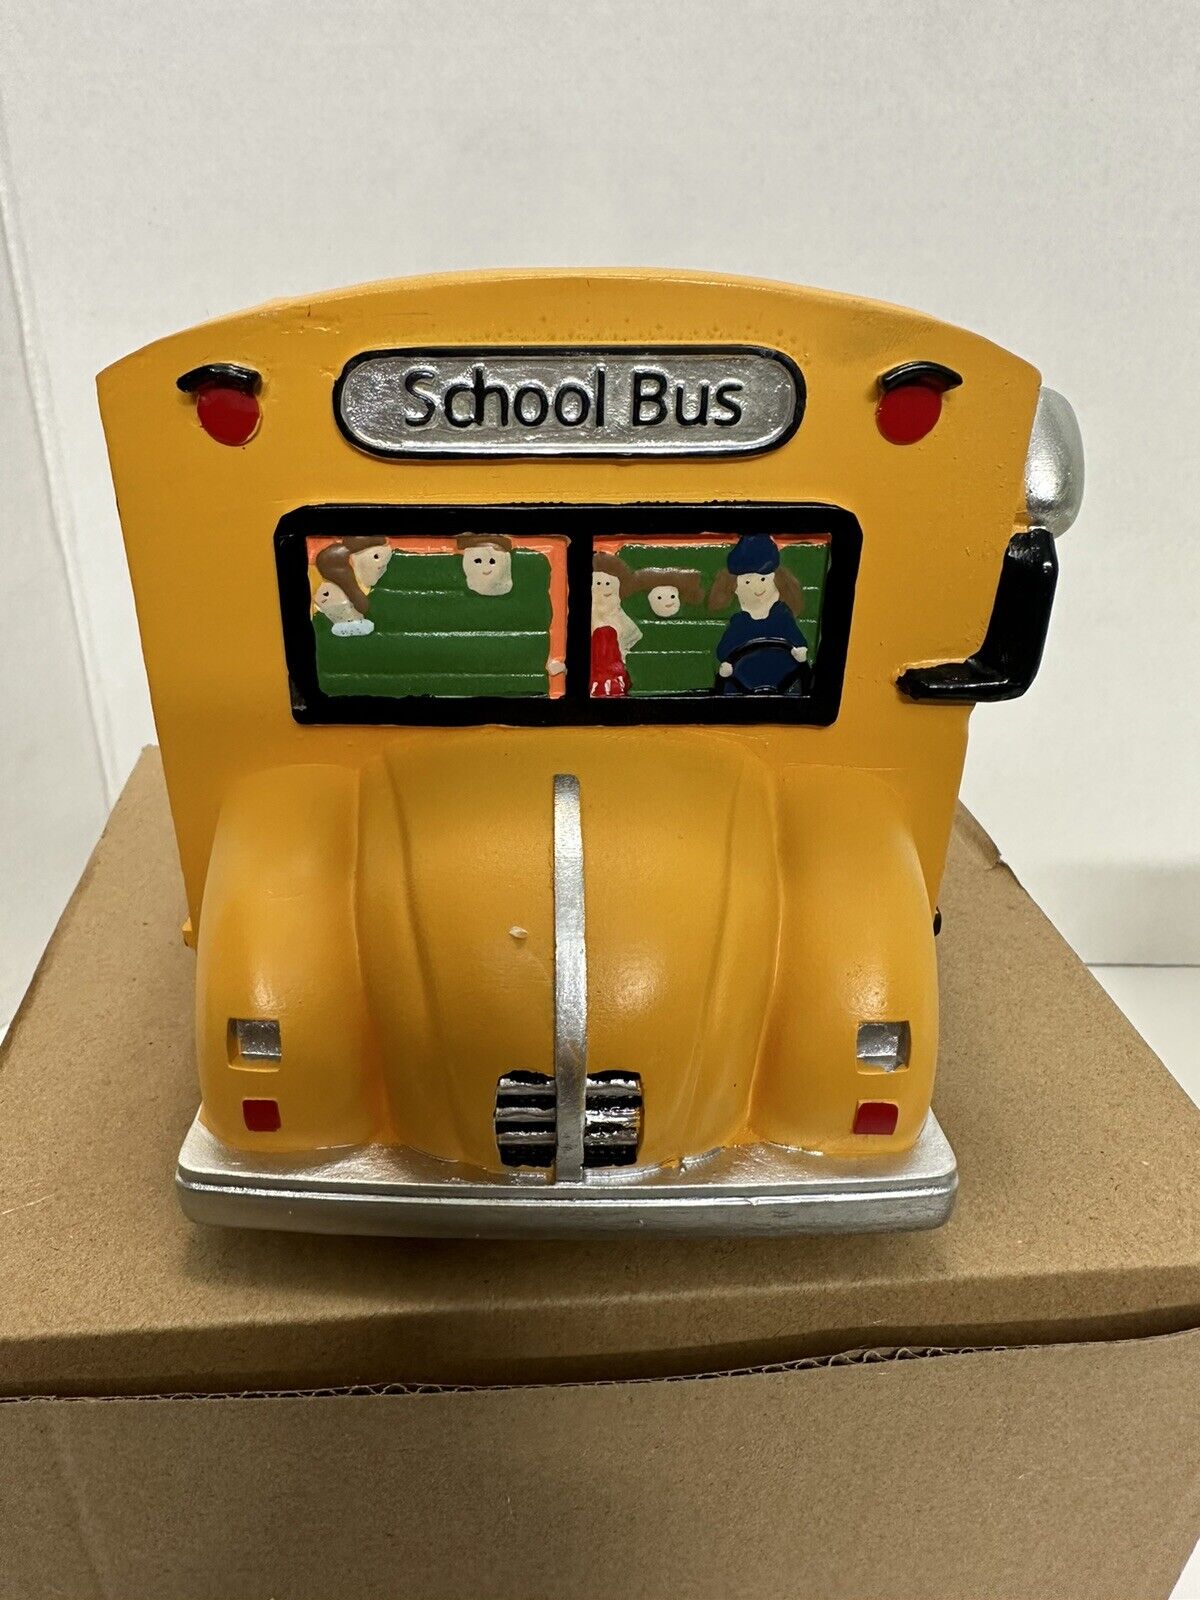 Cute School Bus Planter - Or Multiply Use